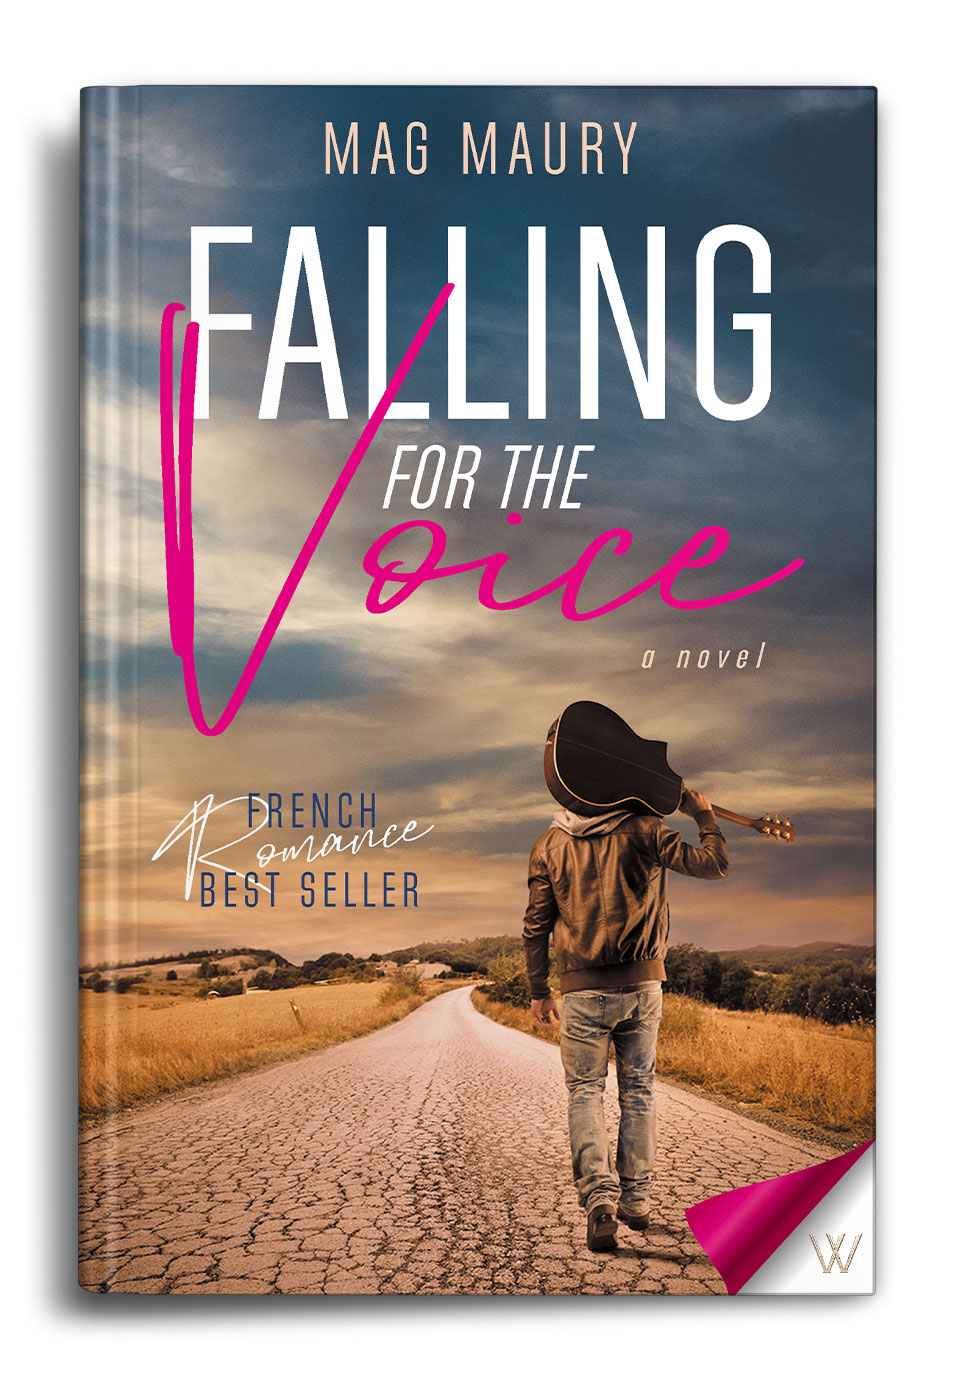 Falling-for-the-Voice-by-Mag-Maury